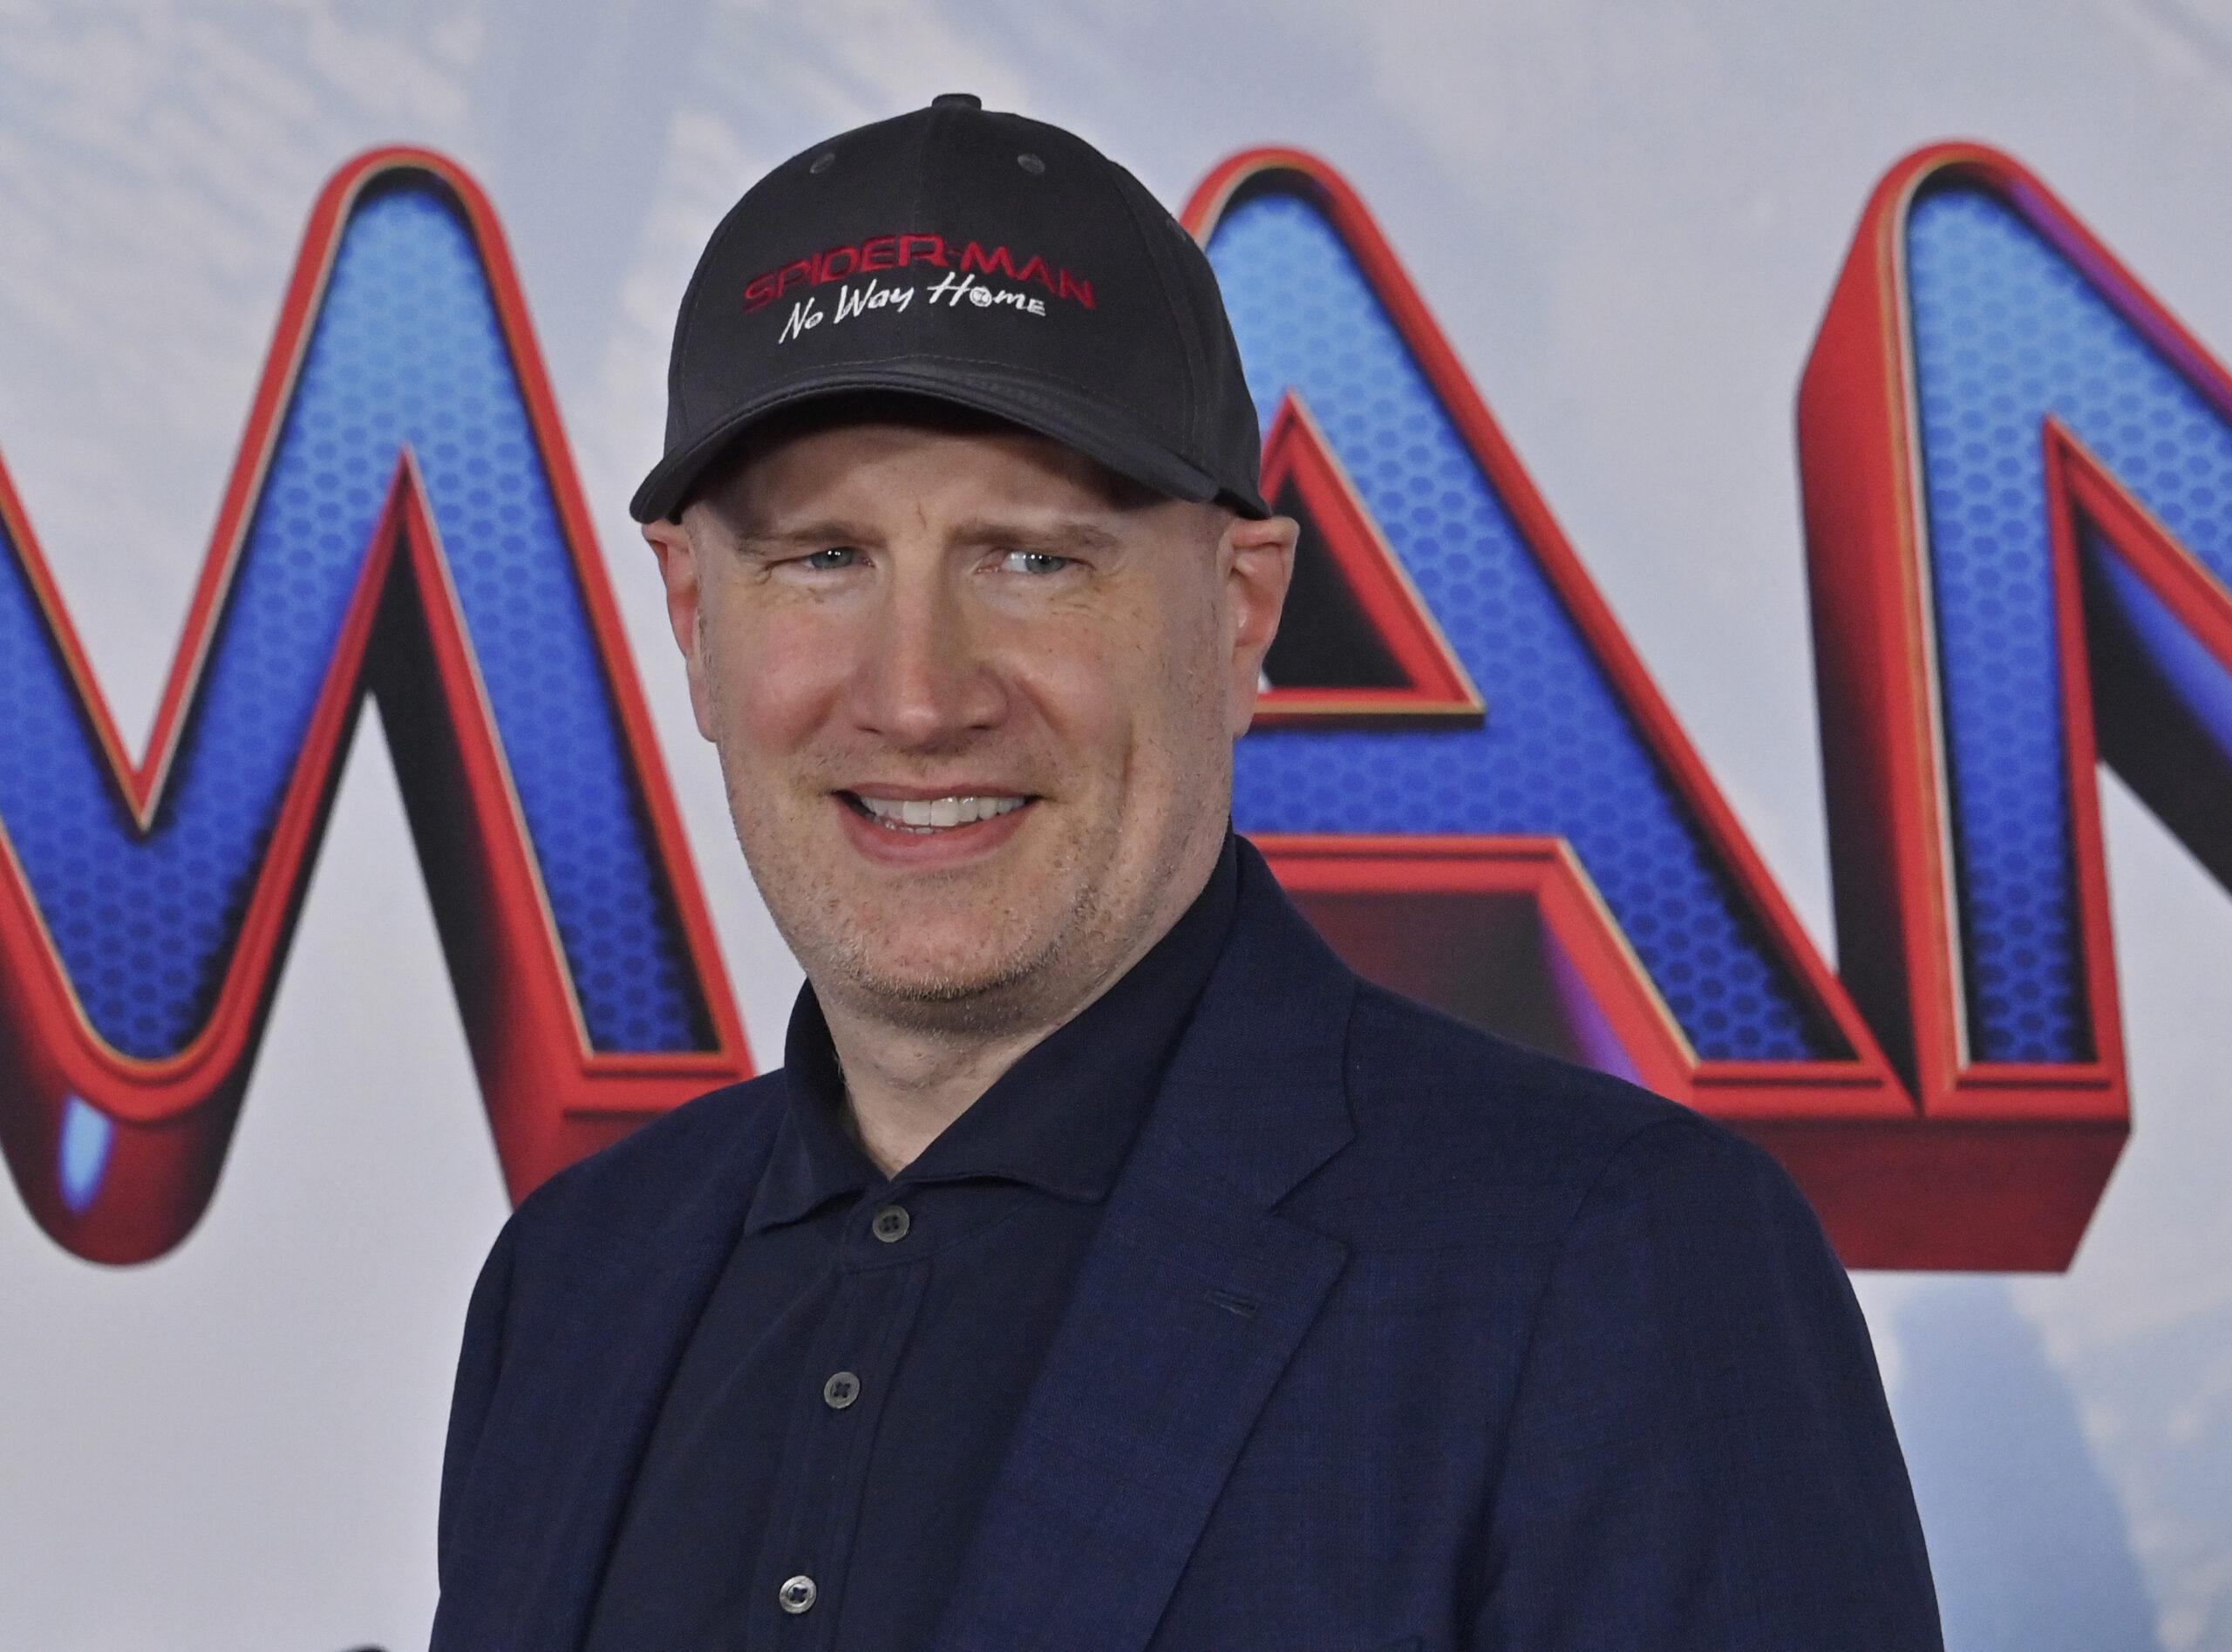 Producer Kevin Feige attends the premiere of the sci-fi motion picture "Spider-Man: No Way Home" at the Regency Village Theatre in the Westwood section of Los Angeles on Monday, December 13, 2021. 